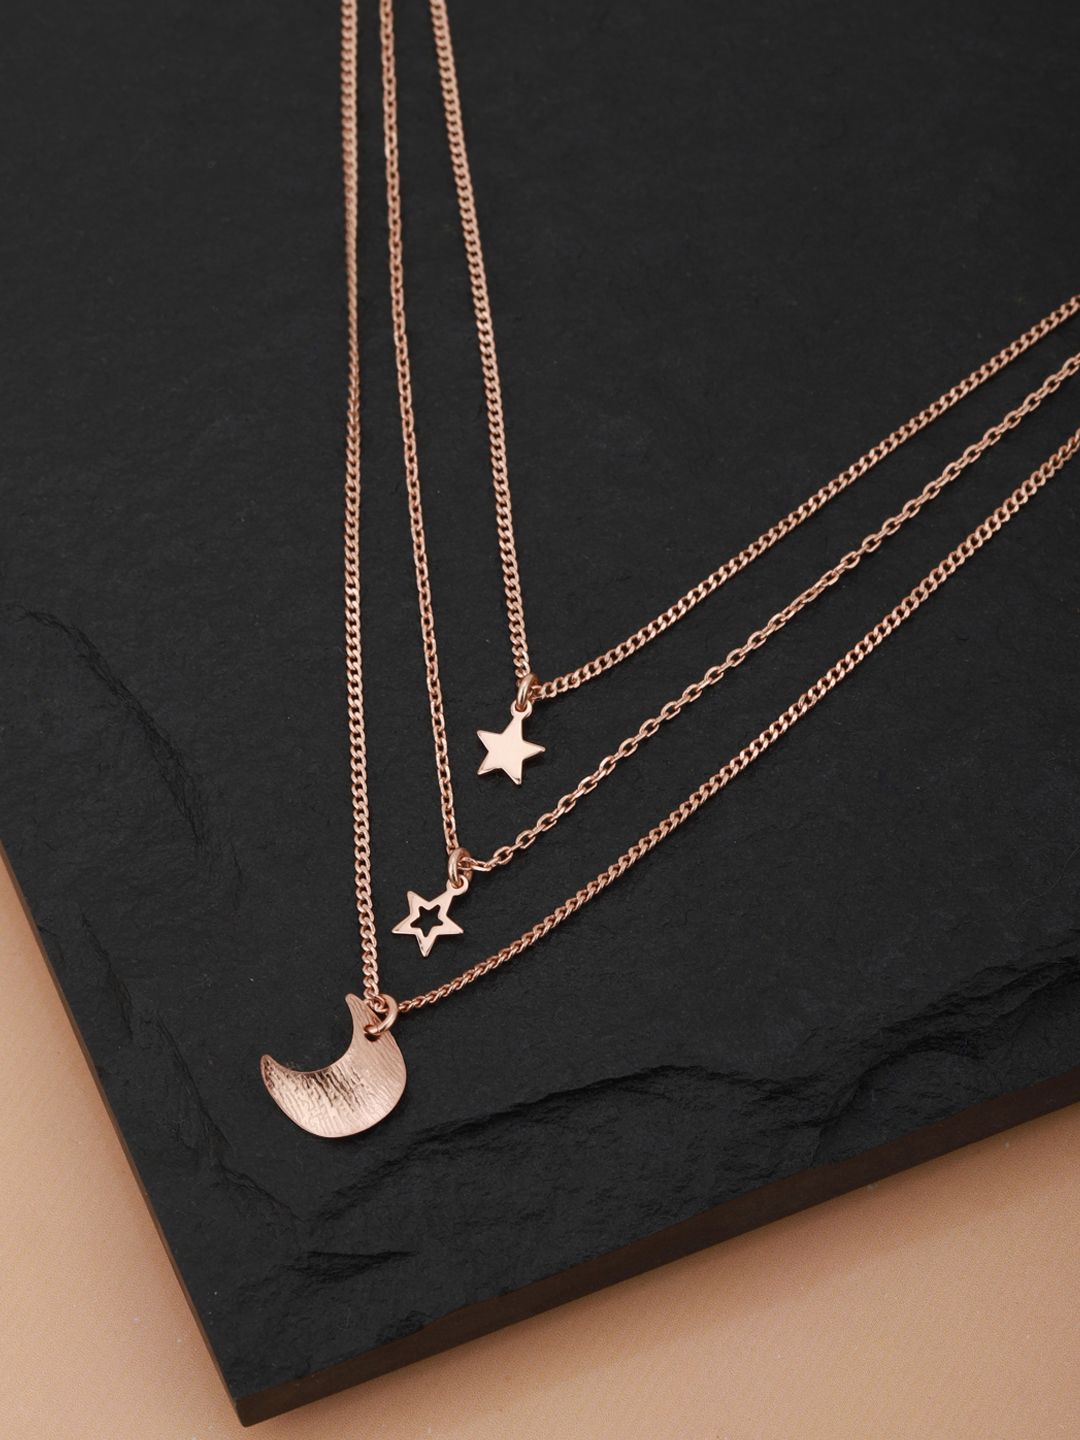 Carlton London Rose Gold-Plated Layered Necklace Price in India